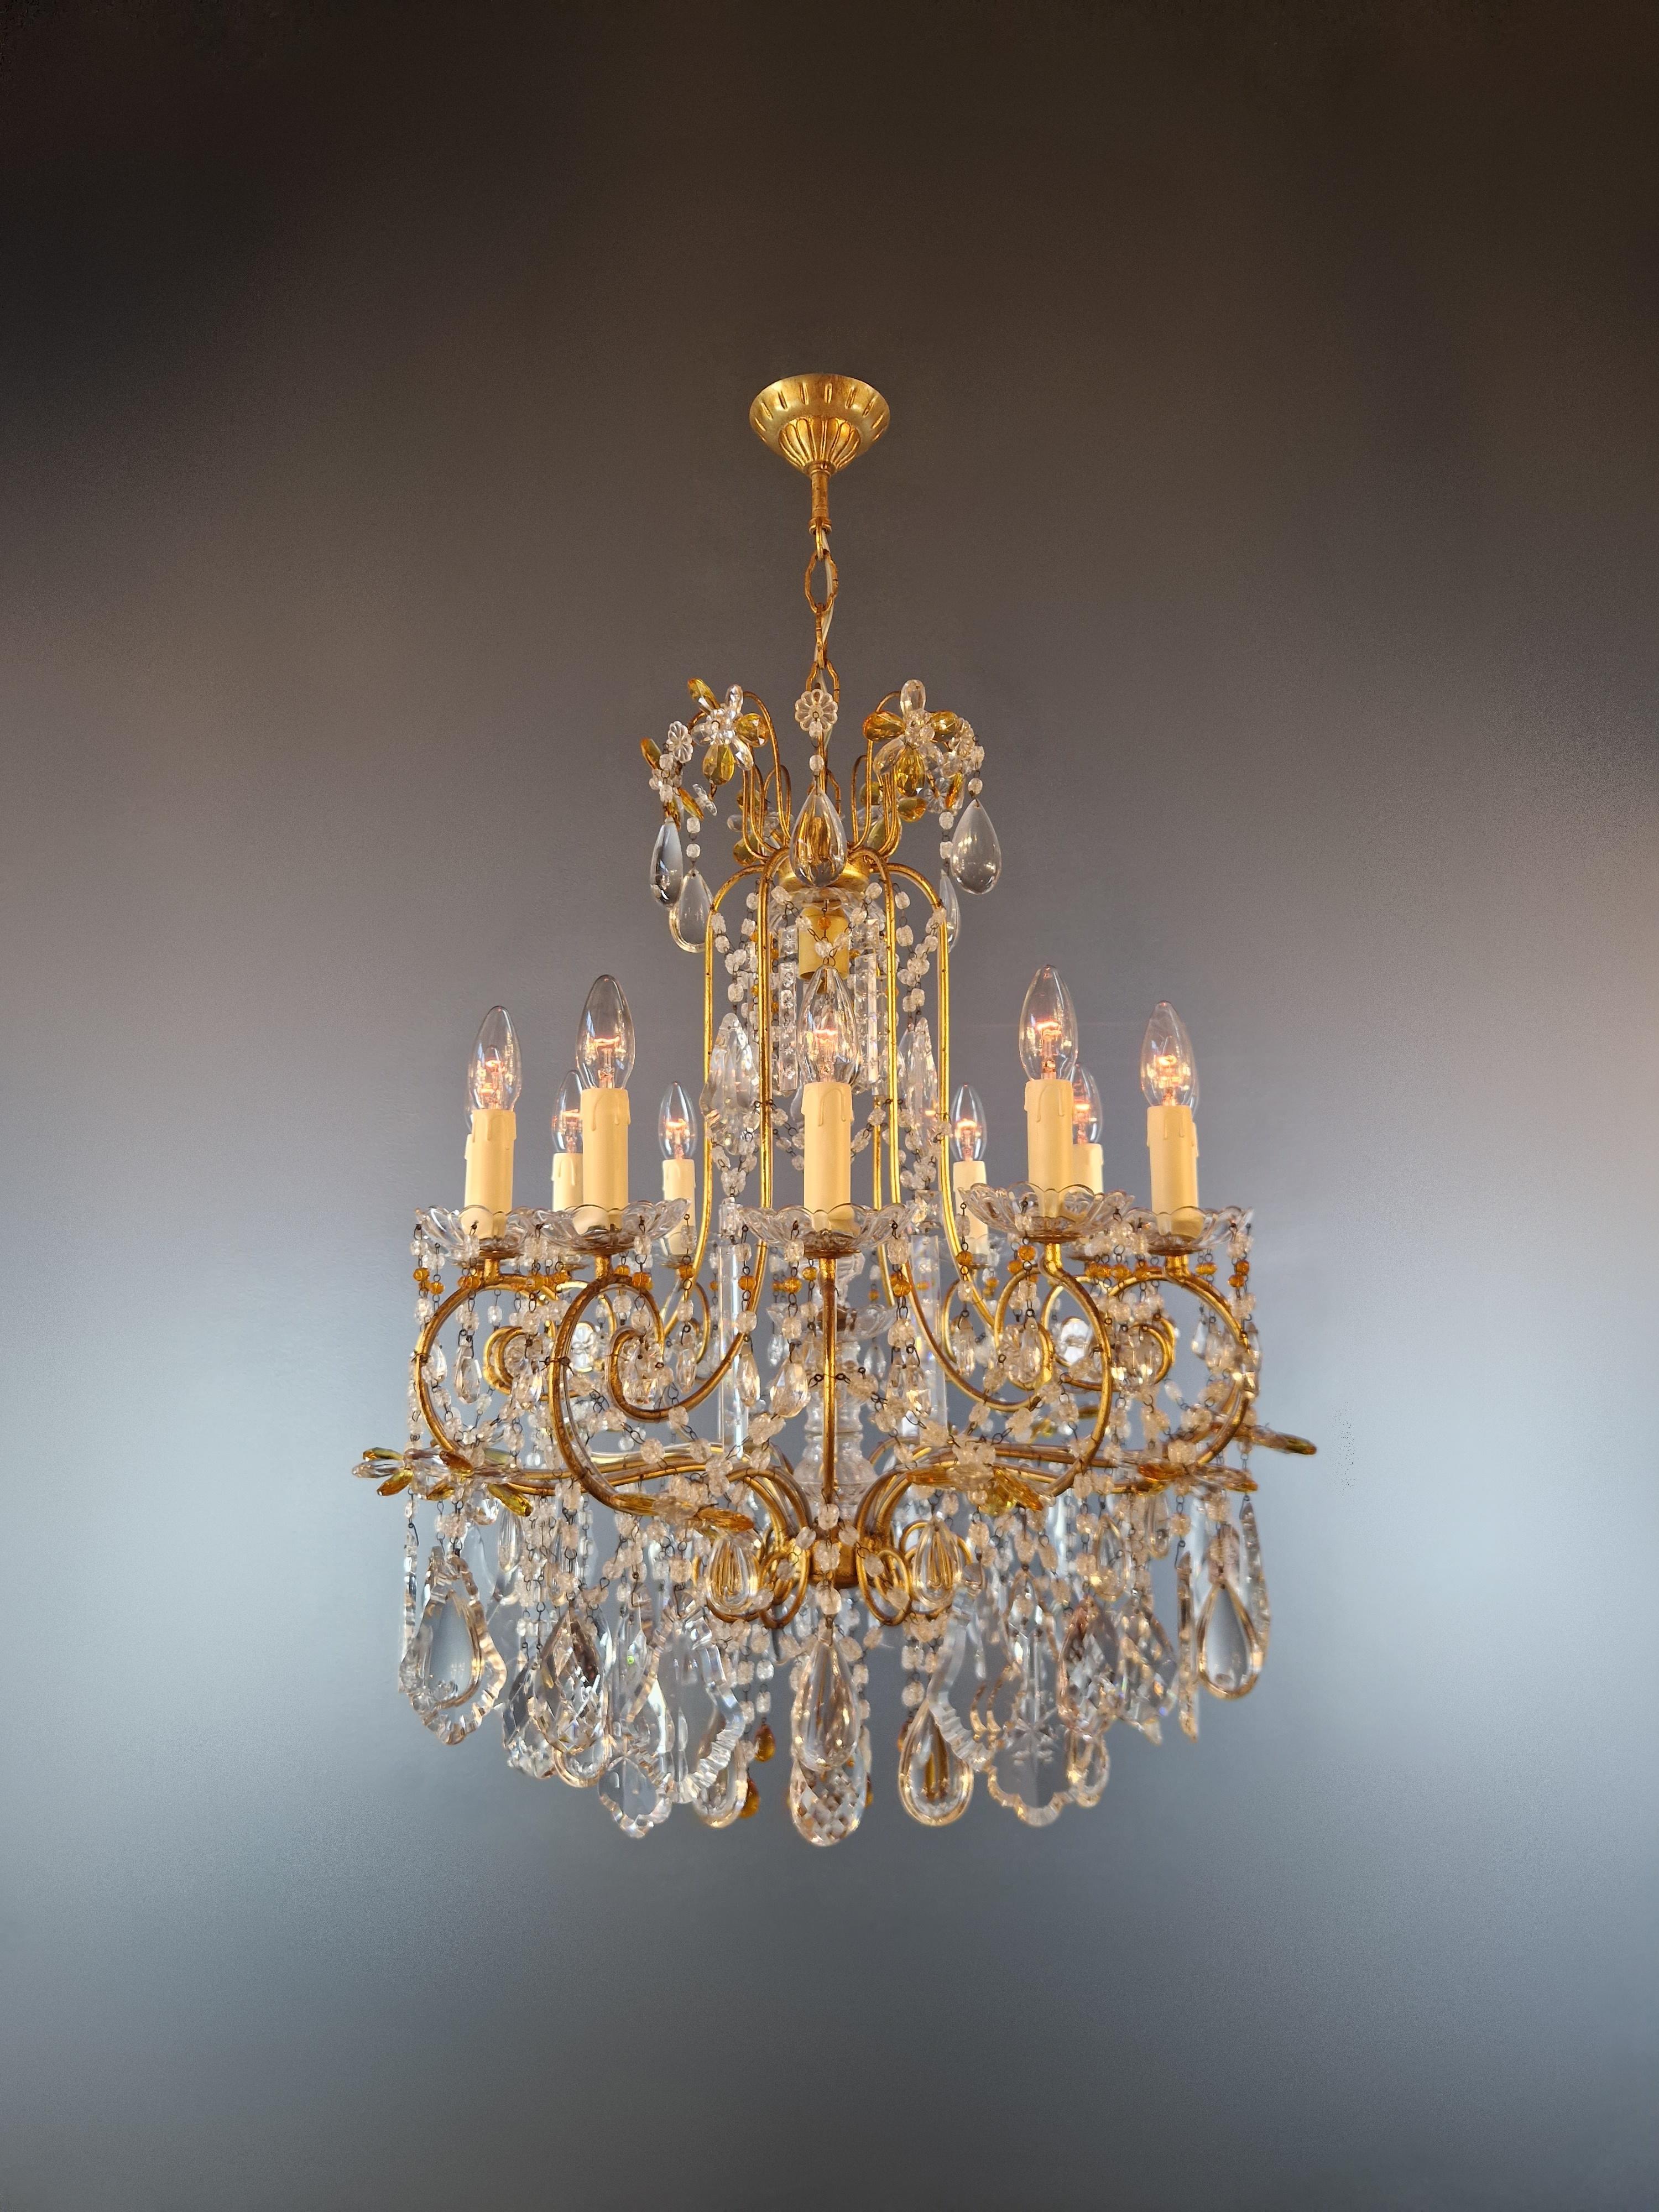 Hand-Knotted Pair of Antique Crystal Chandelier Ceiling Lamp Amber Lustre Art Nouveau